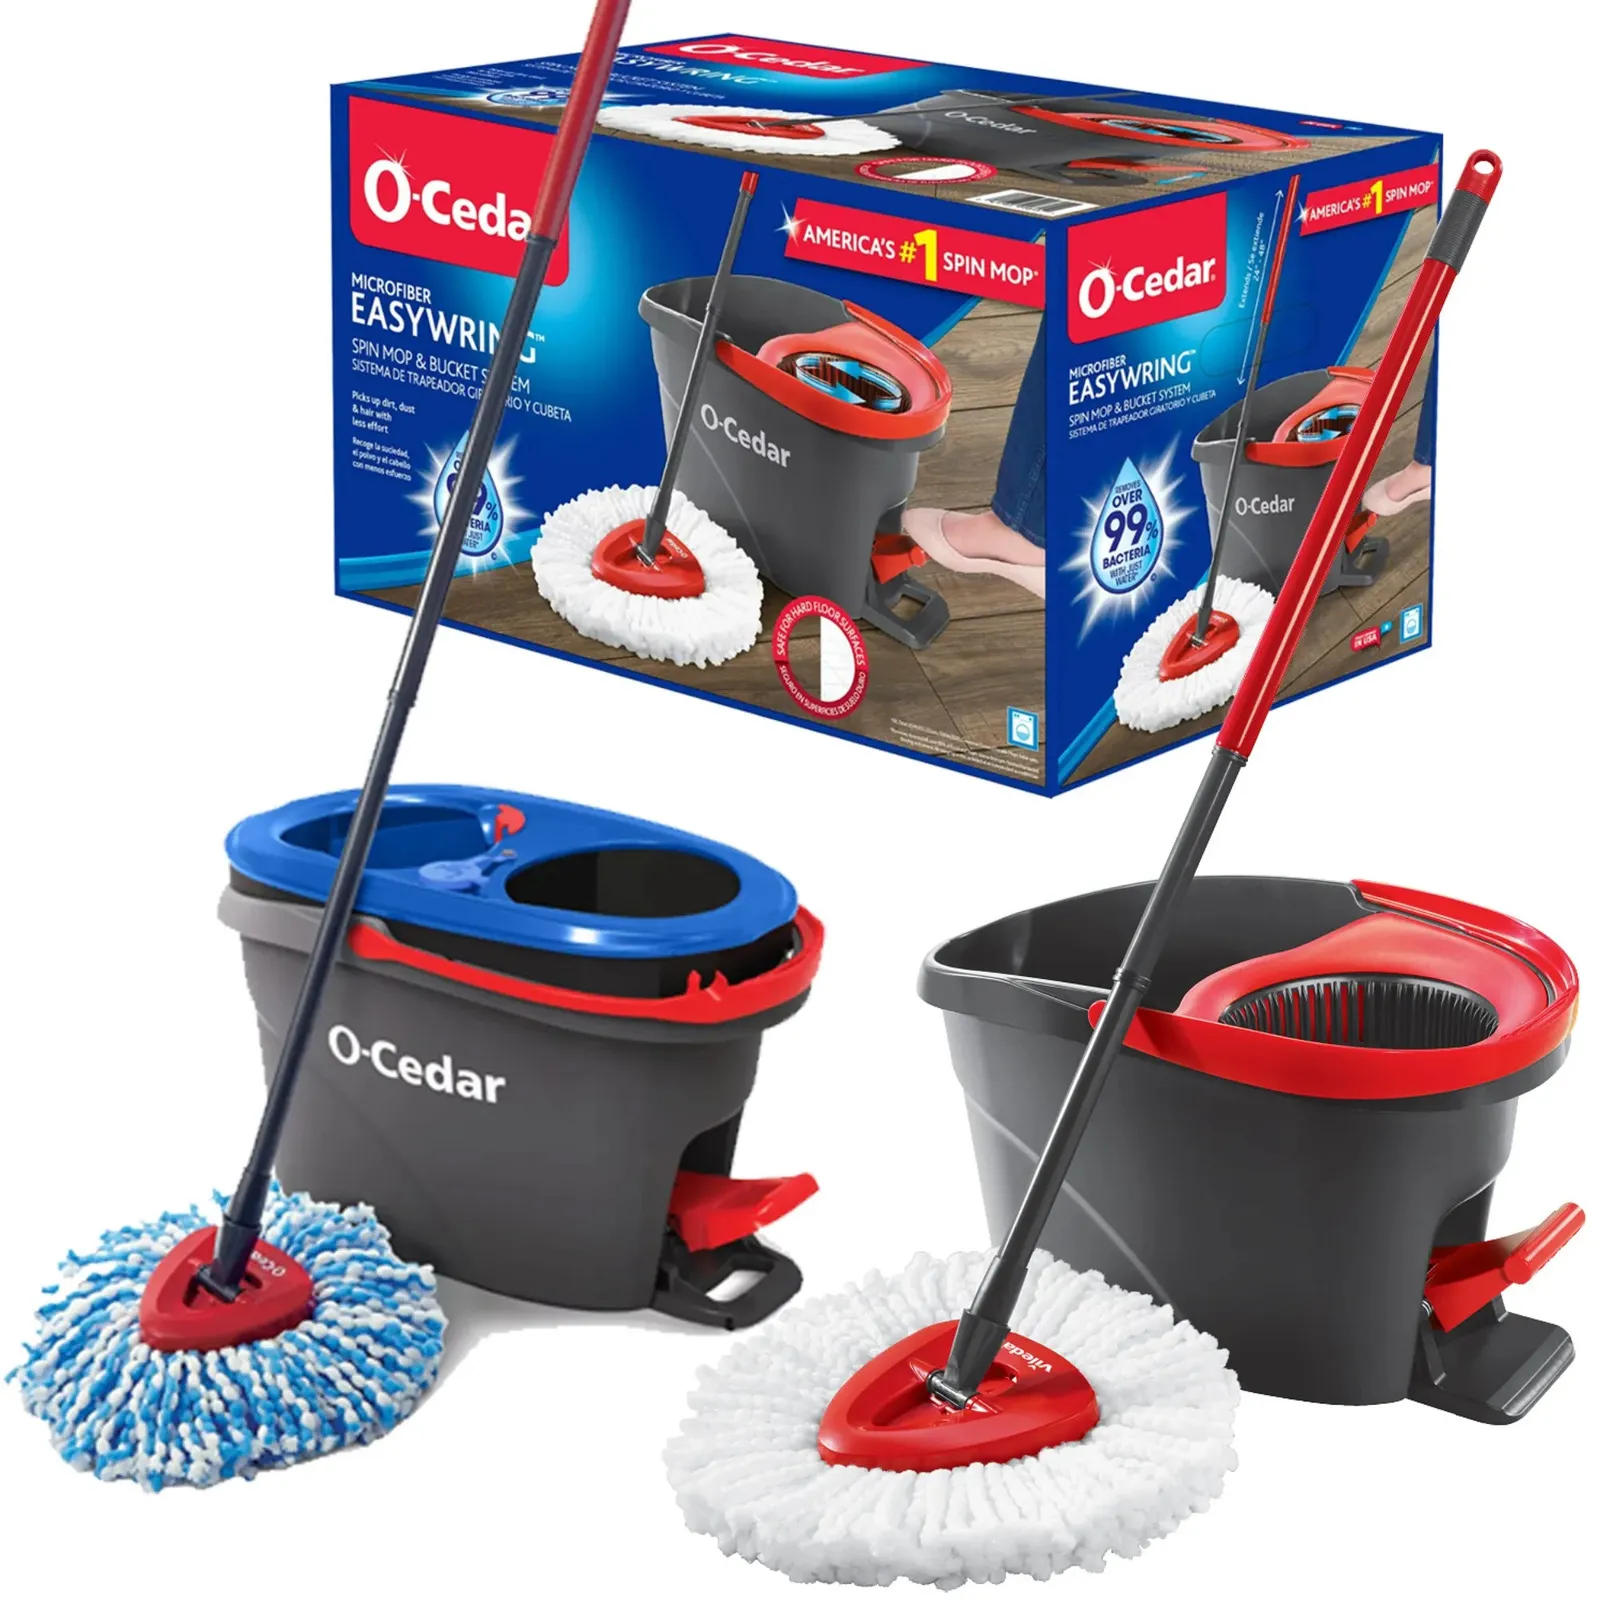 MOPS Foot Piede Attivata Pedal Spin Mop System Free 231206